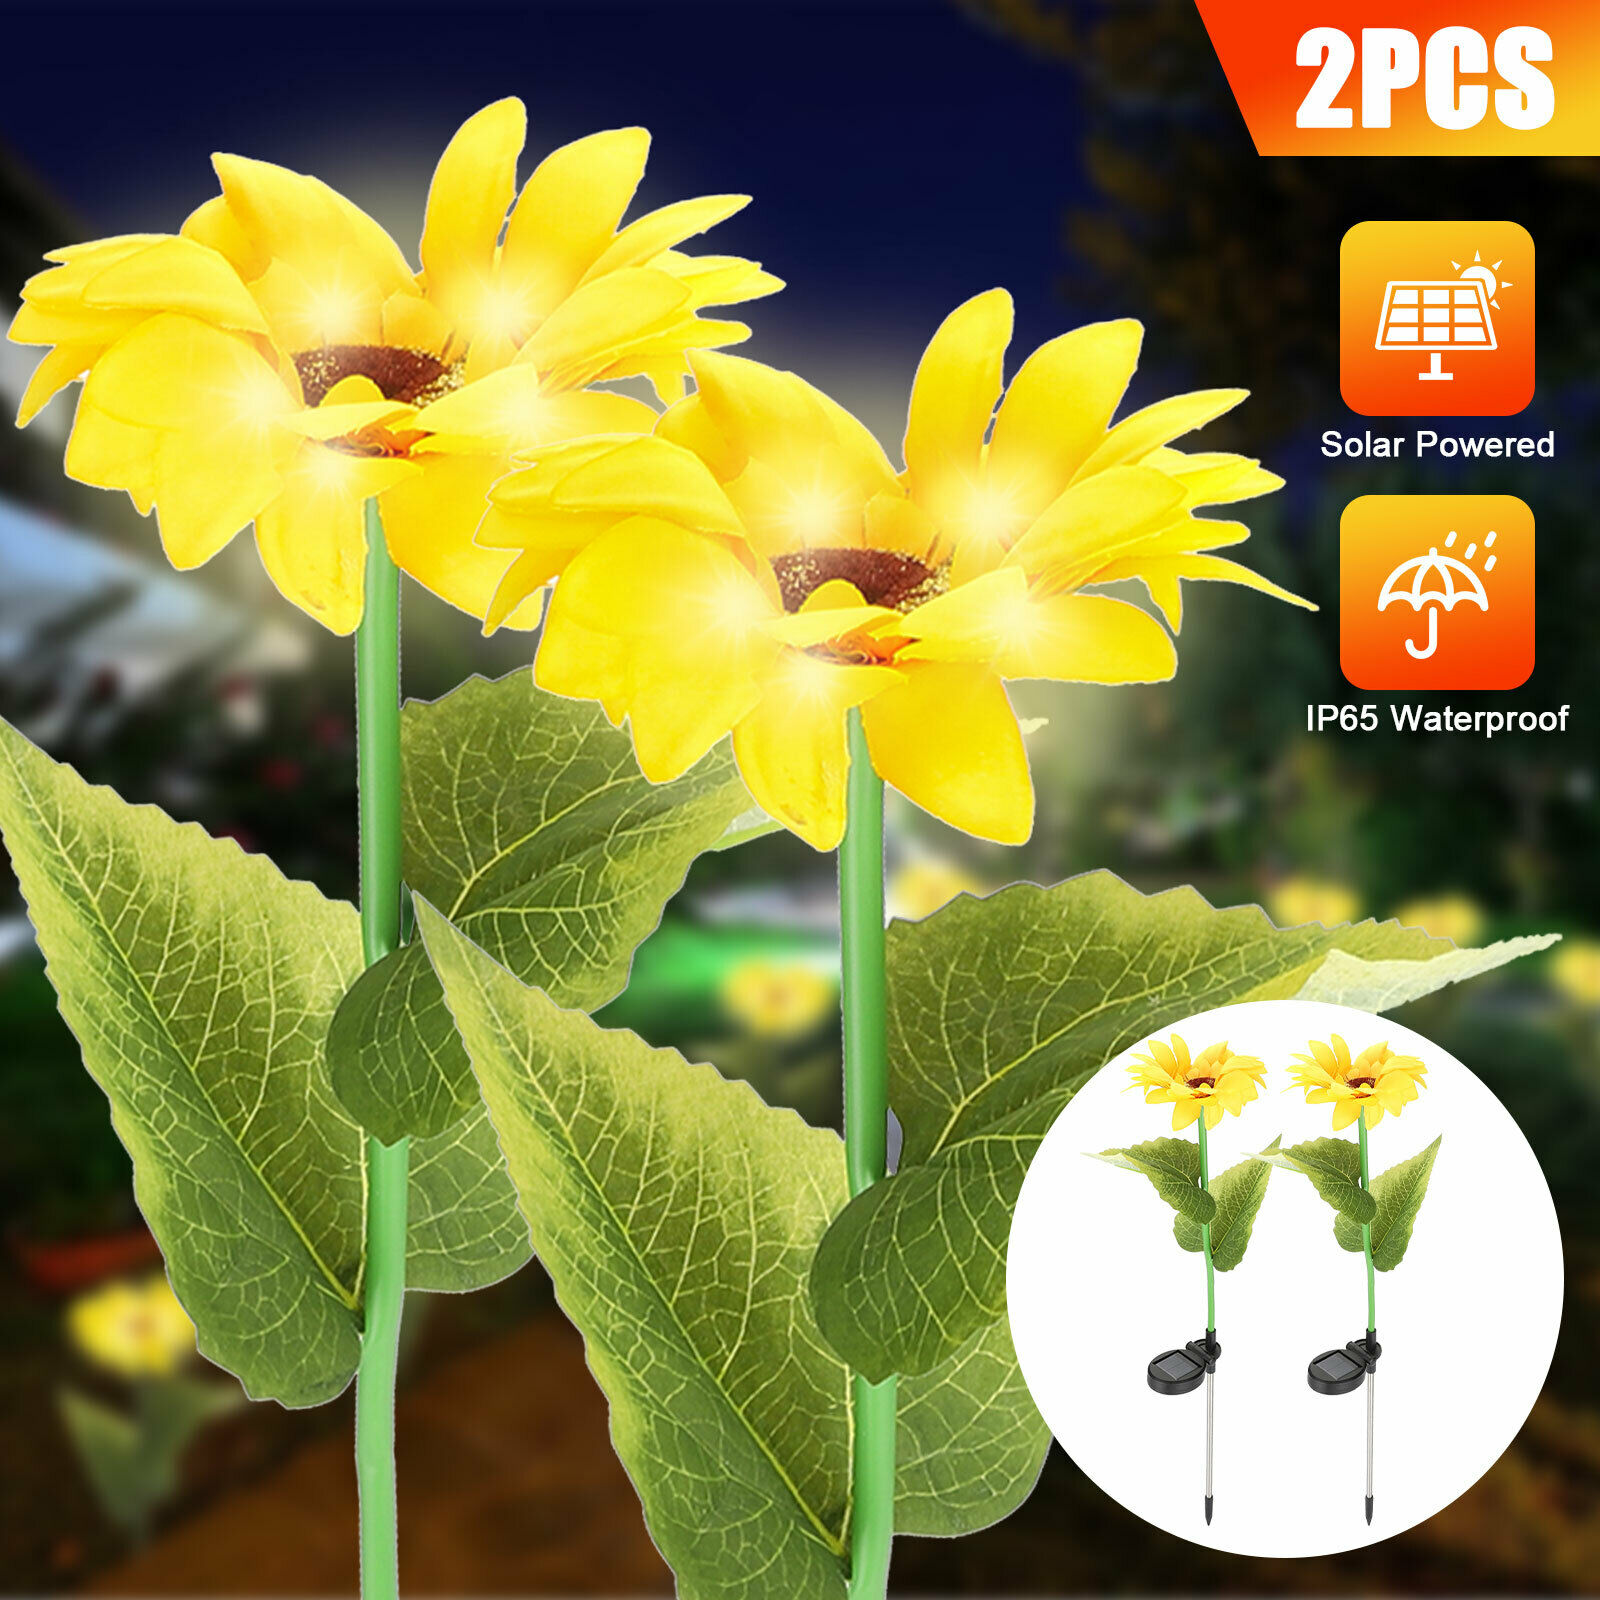 Solar Powered Outdoor Garden Sunflowers LED Lights For Patio Waterproof H5S1 